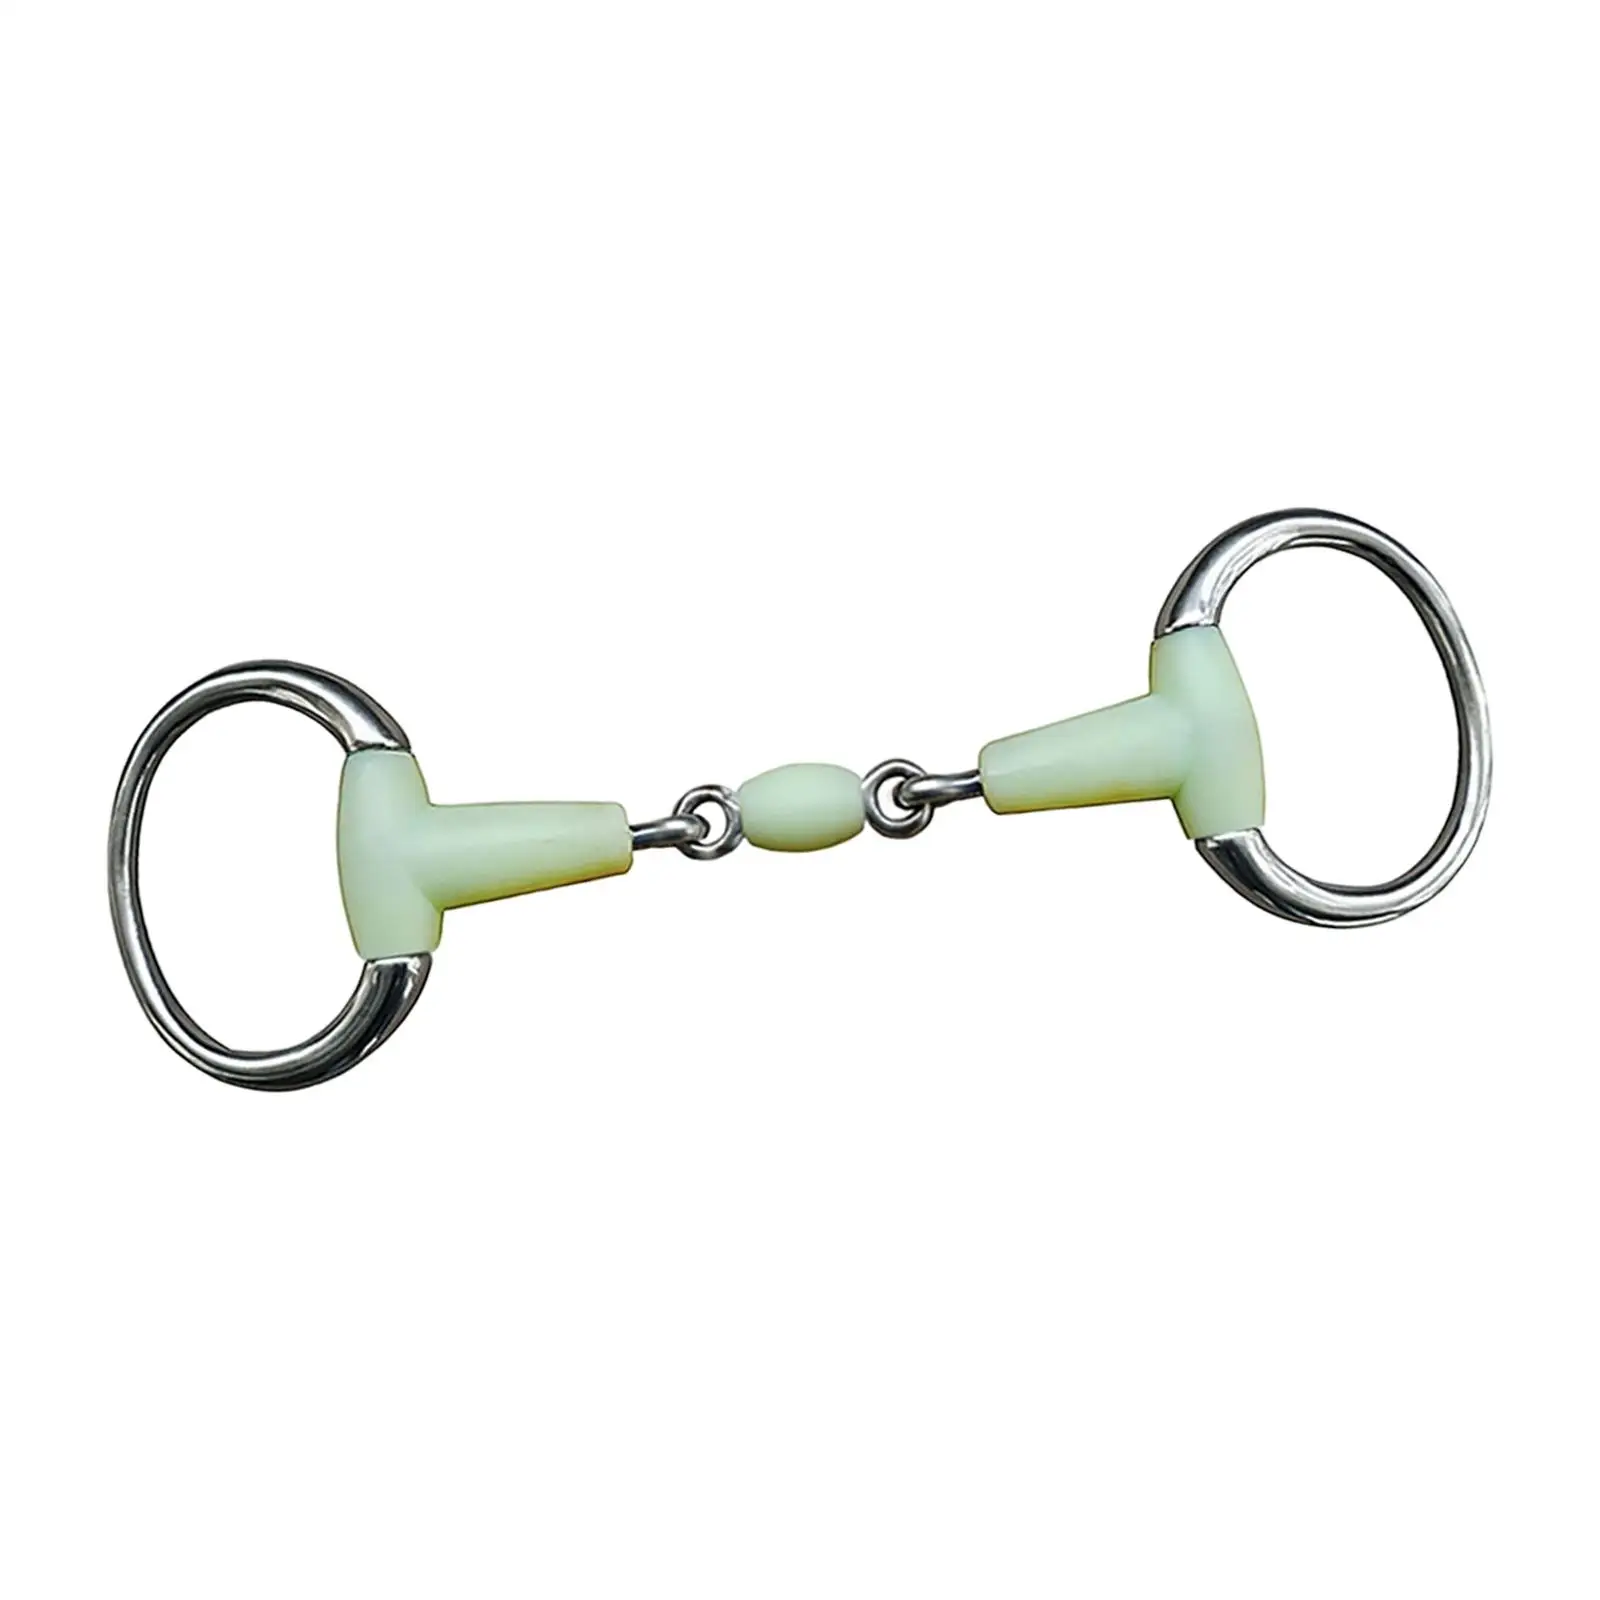 Horse Bit Mouth Equestrian Accessories Gear for Draft Horses Mules